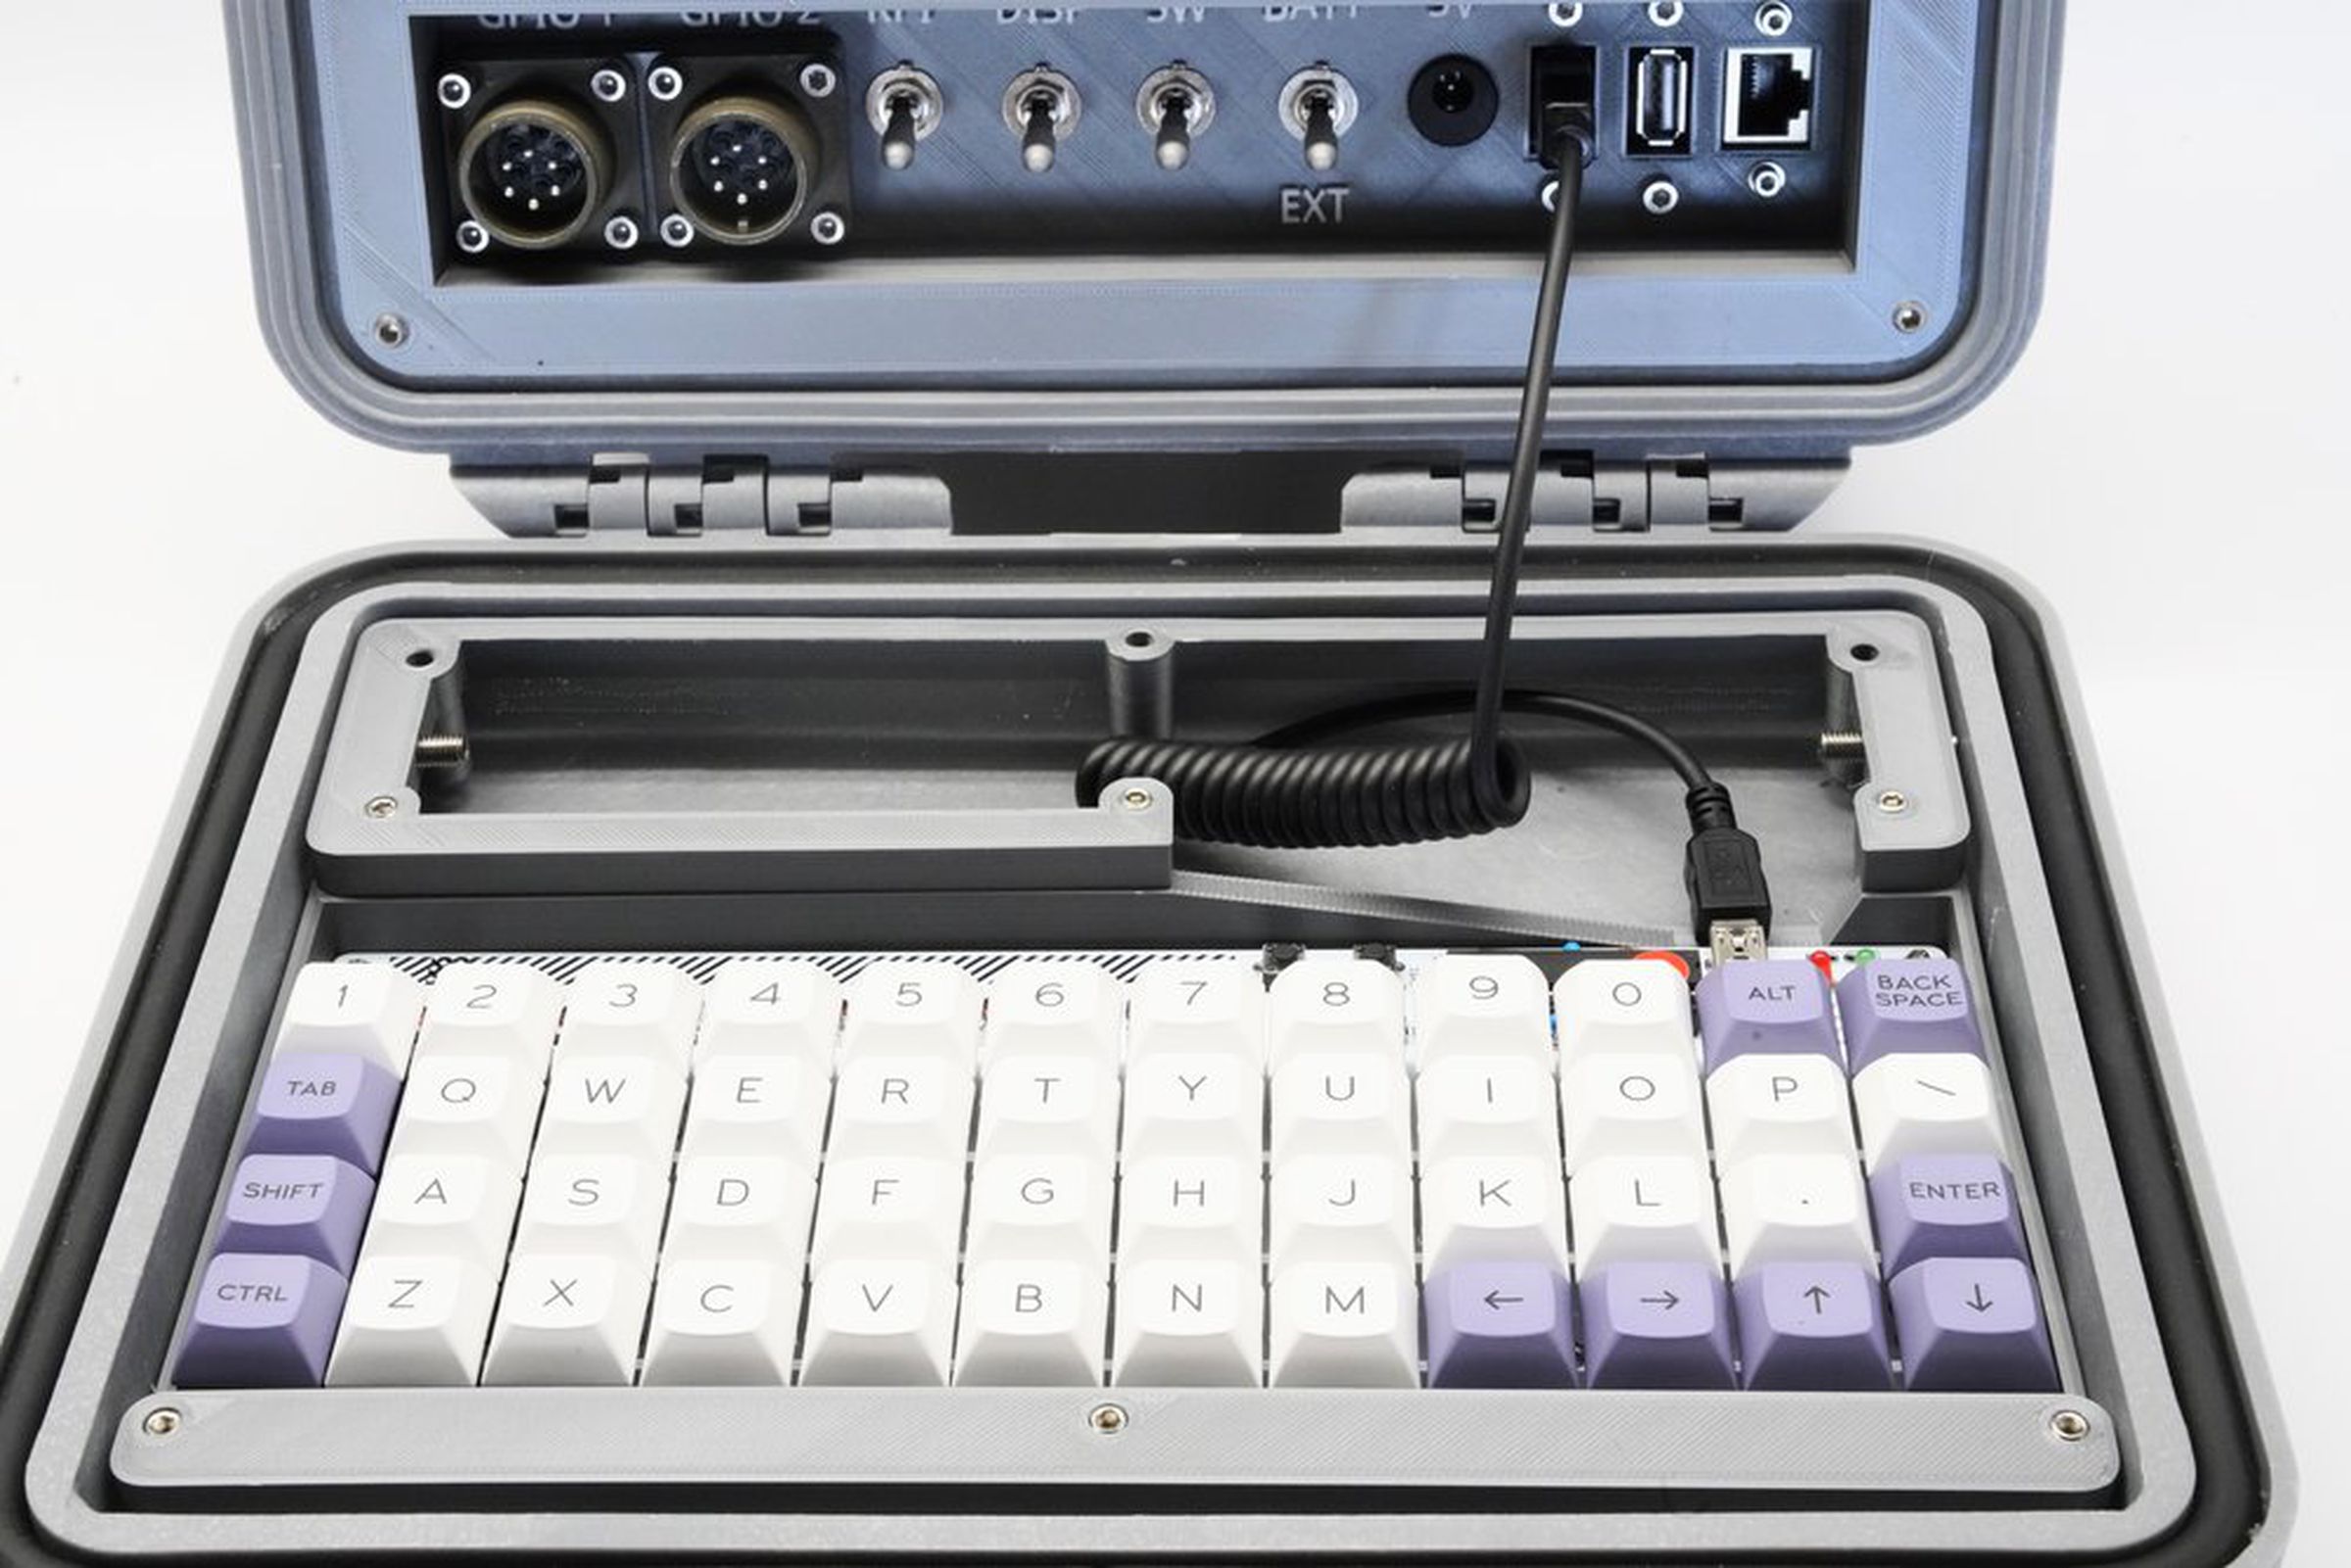 The ortholinear keyboard fits neatly into the case with the help of some 3D-printed components. 